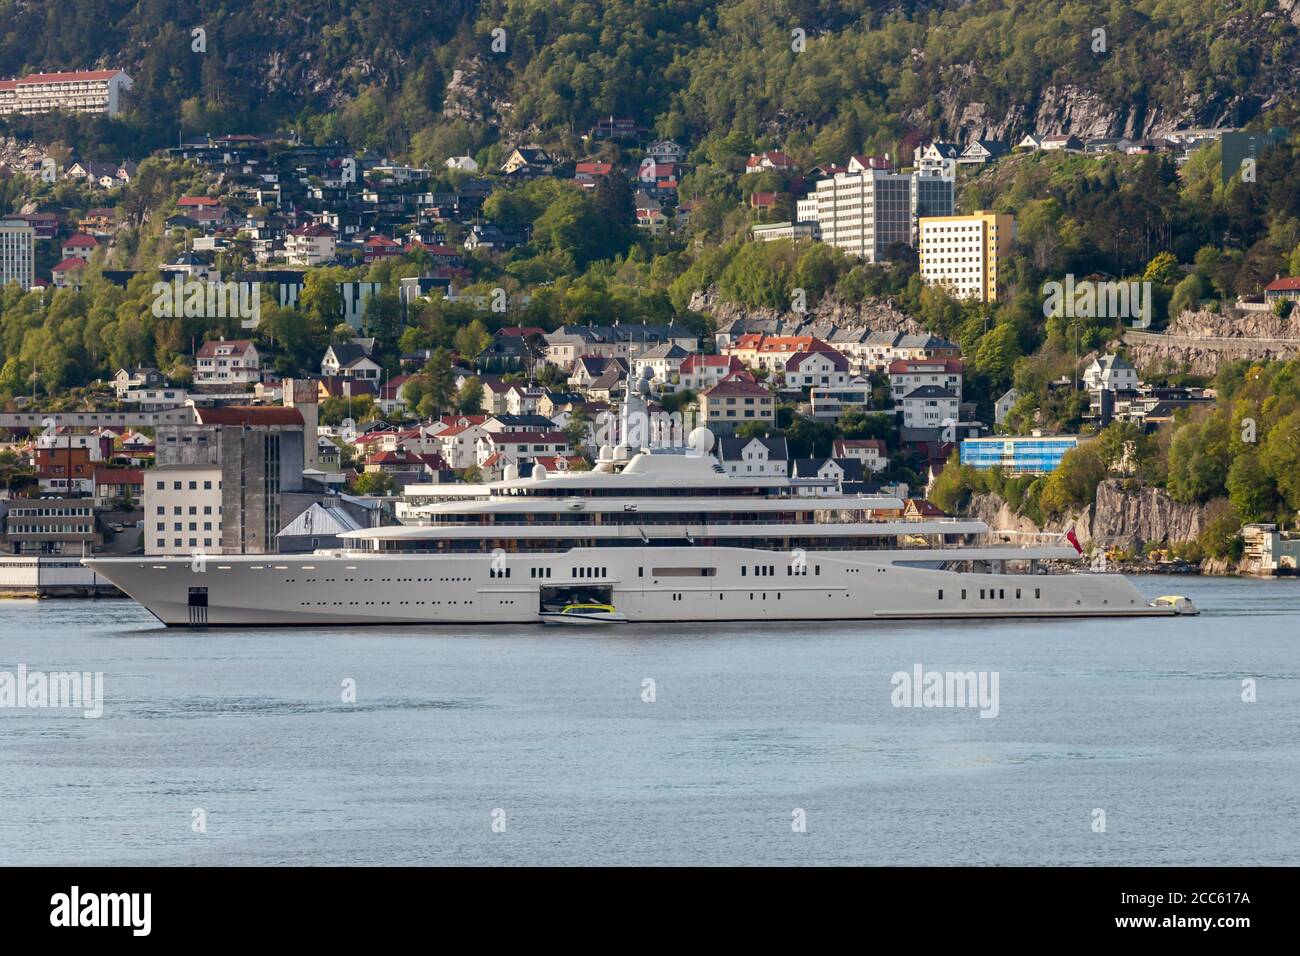 BERGEN NORWAY - 2015 MAY 28. The Eclipse Mega yacht at anchor in Bergen owned by Russian businessman and Owner of Chelsea F.C Roman Abramovich. Stock Photo